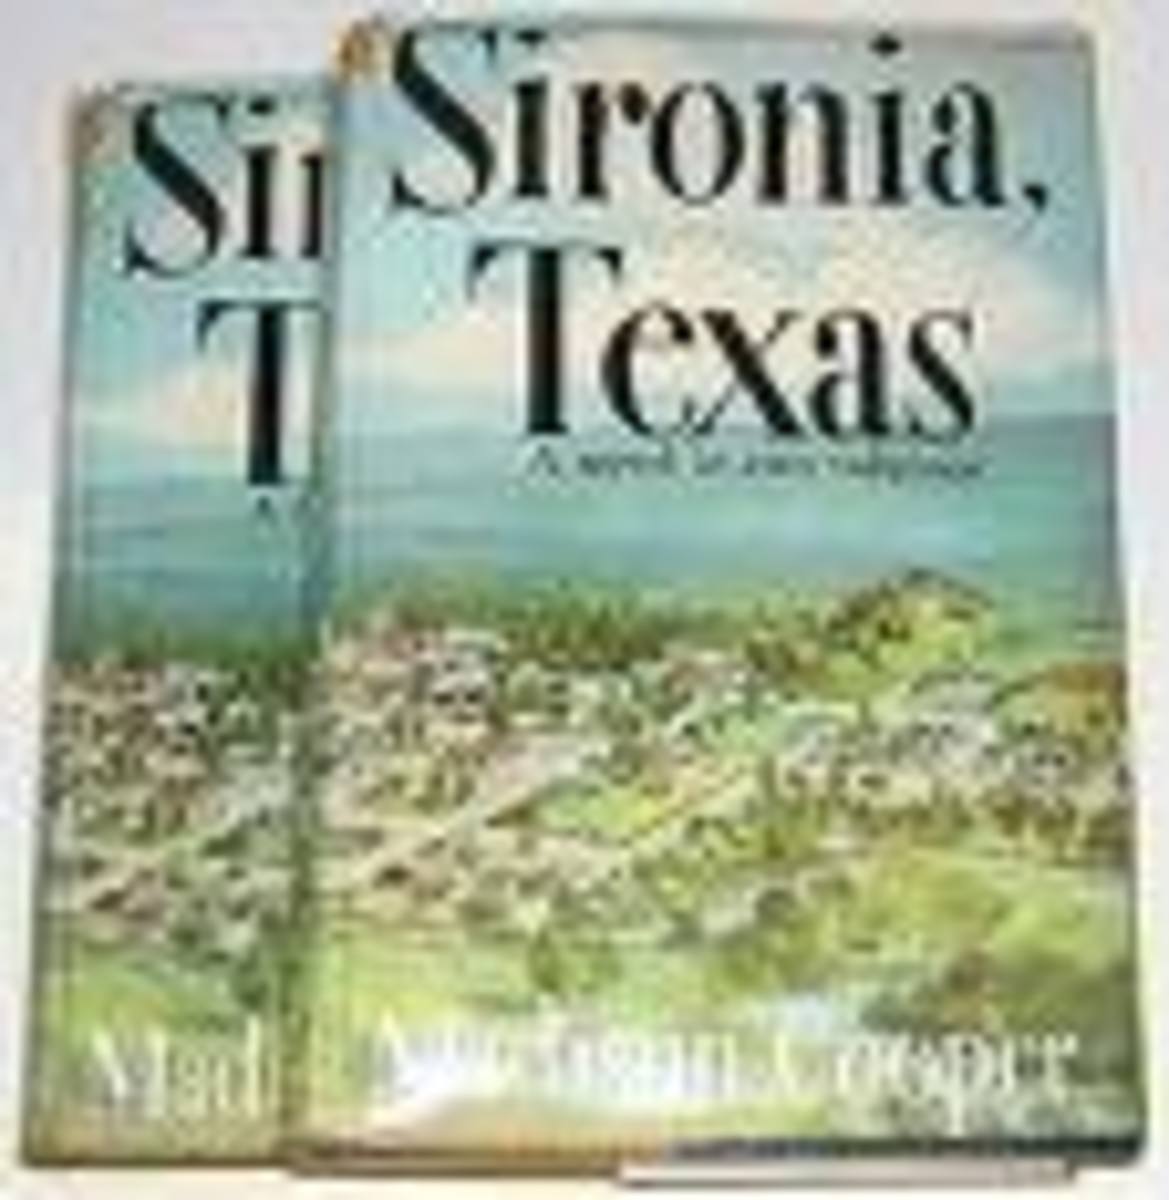 Sironia, Texas by Madison Cooper